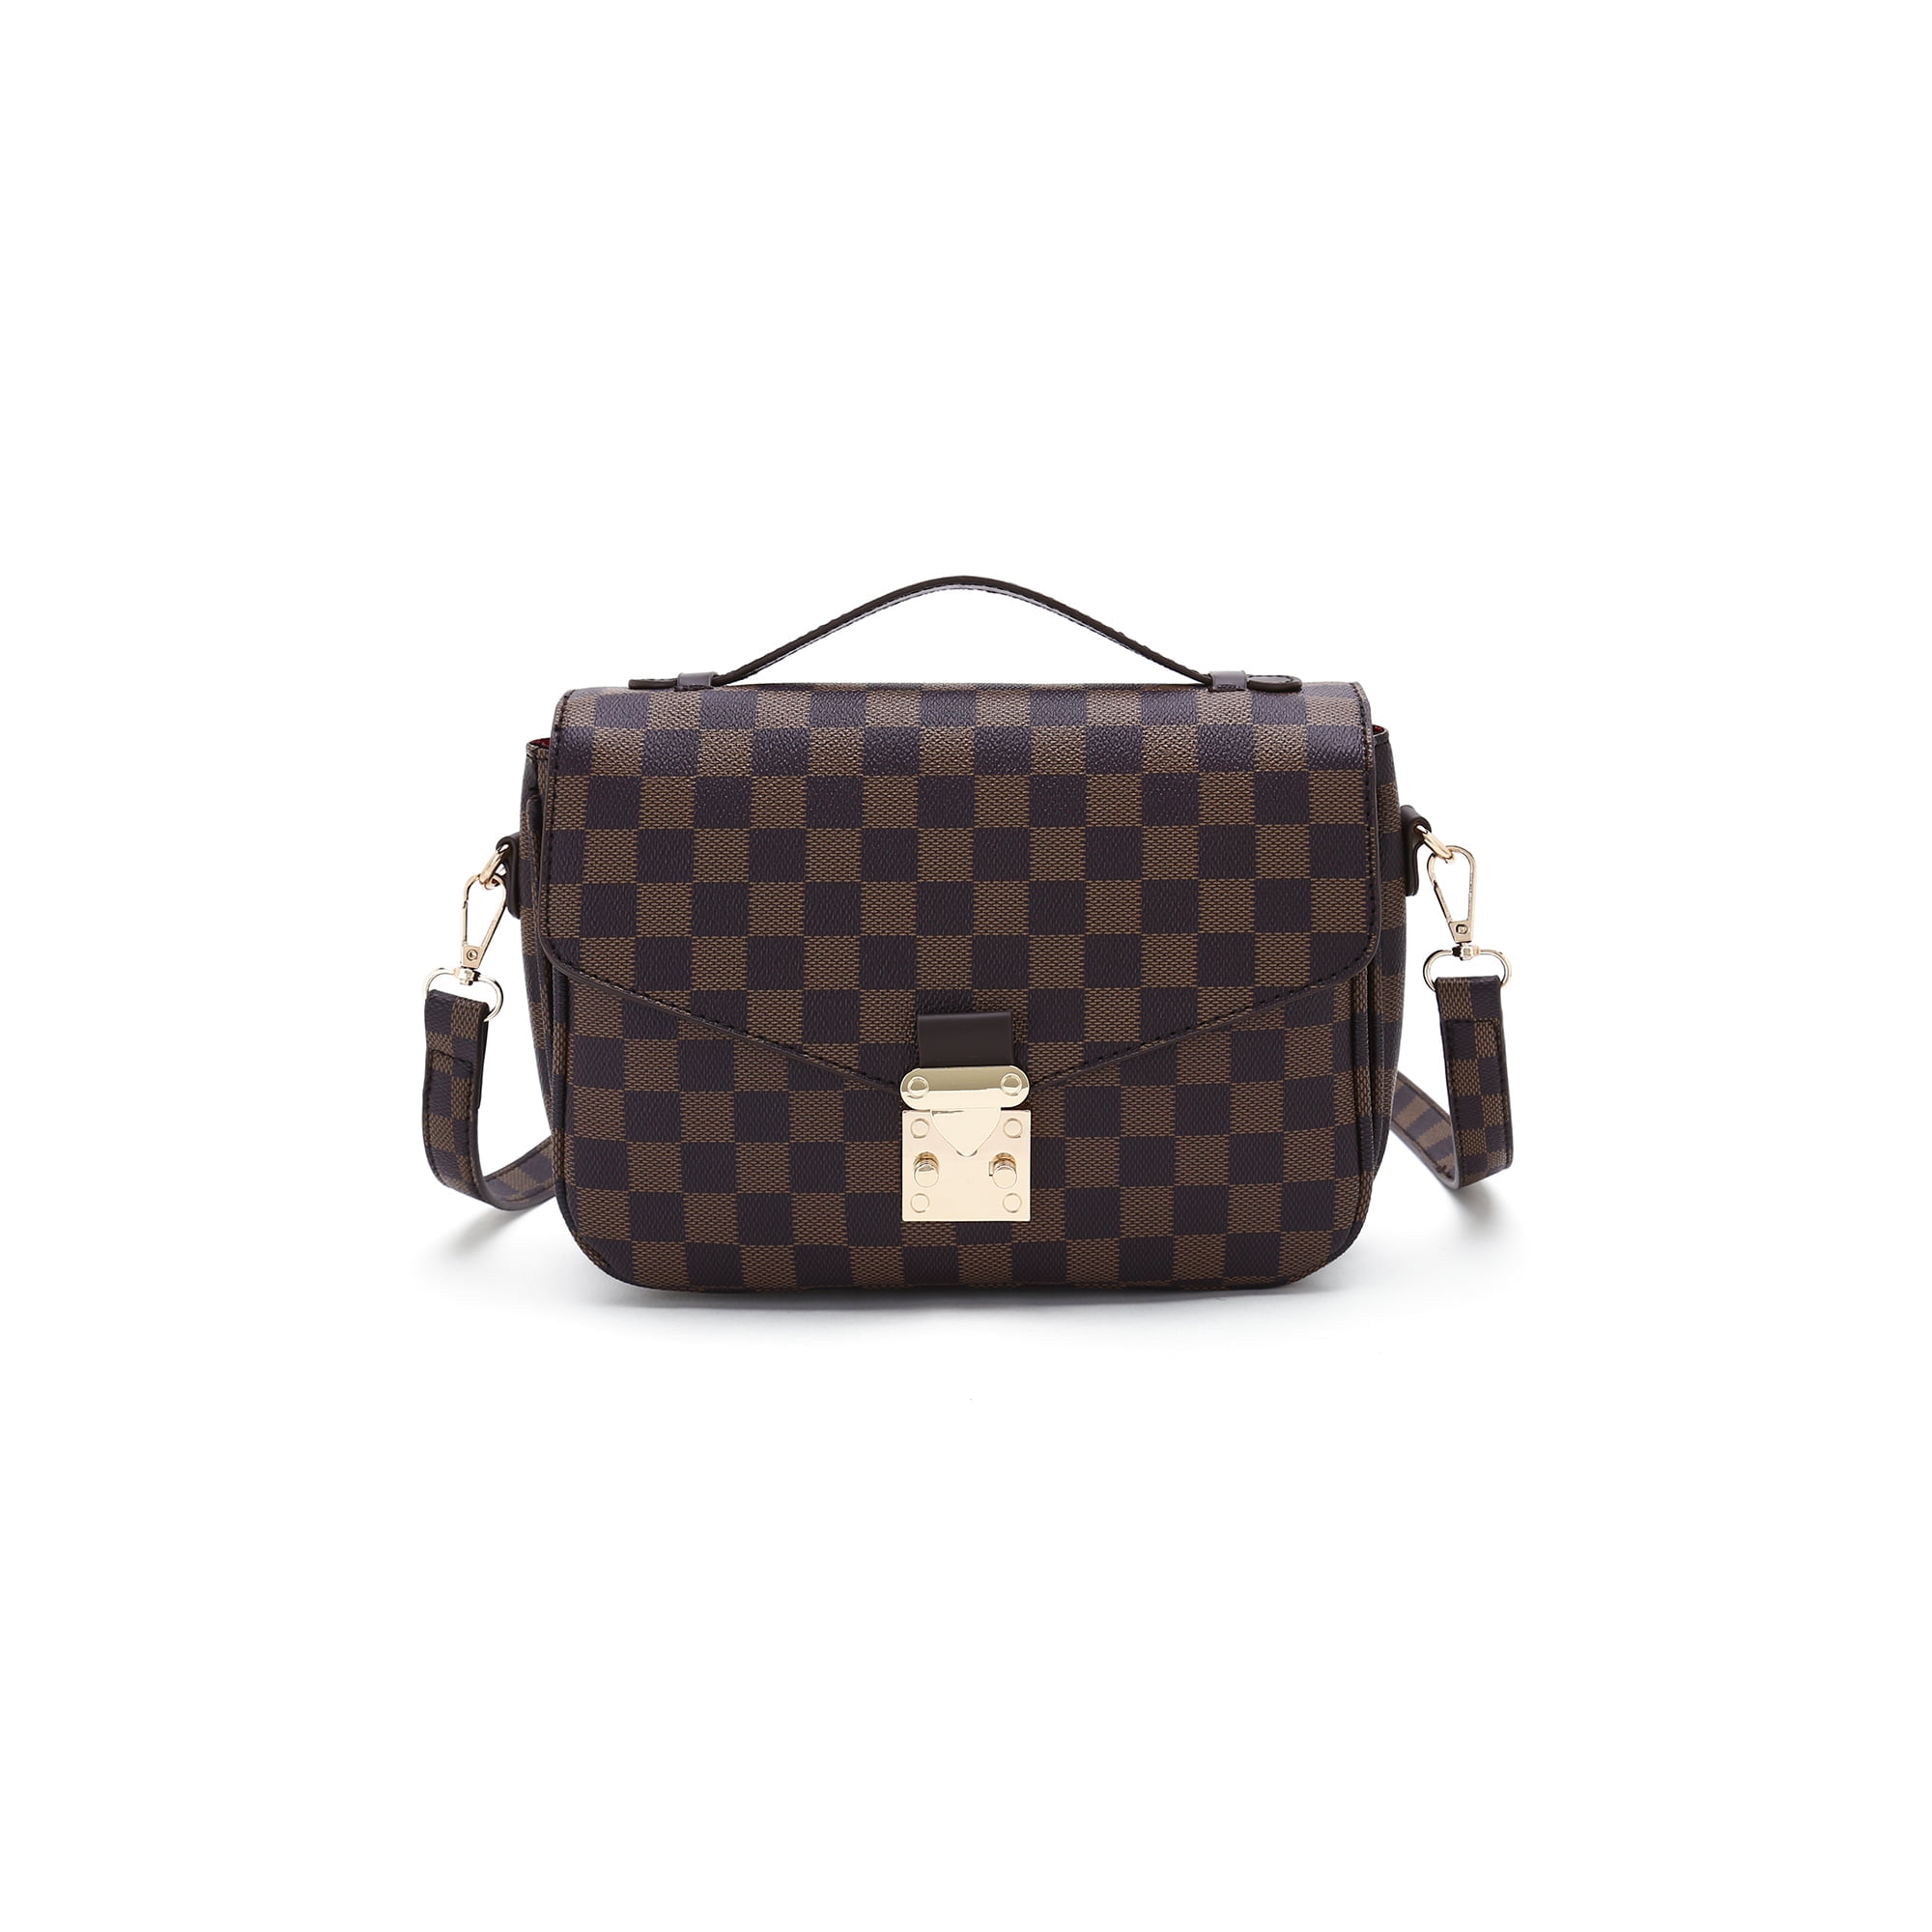 Sexy Dance Women Checkered Crossbody Bag Purse and handbag Shoulder Bag  with Inner Pouch Pu Vegan Leather Coffee